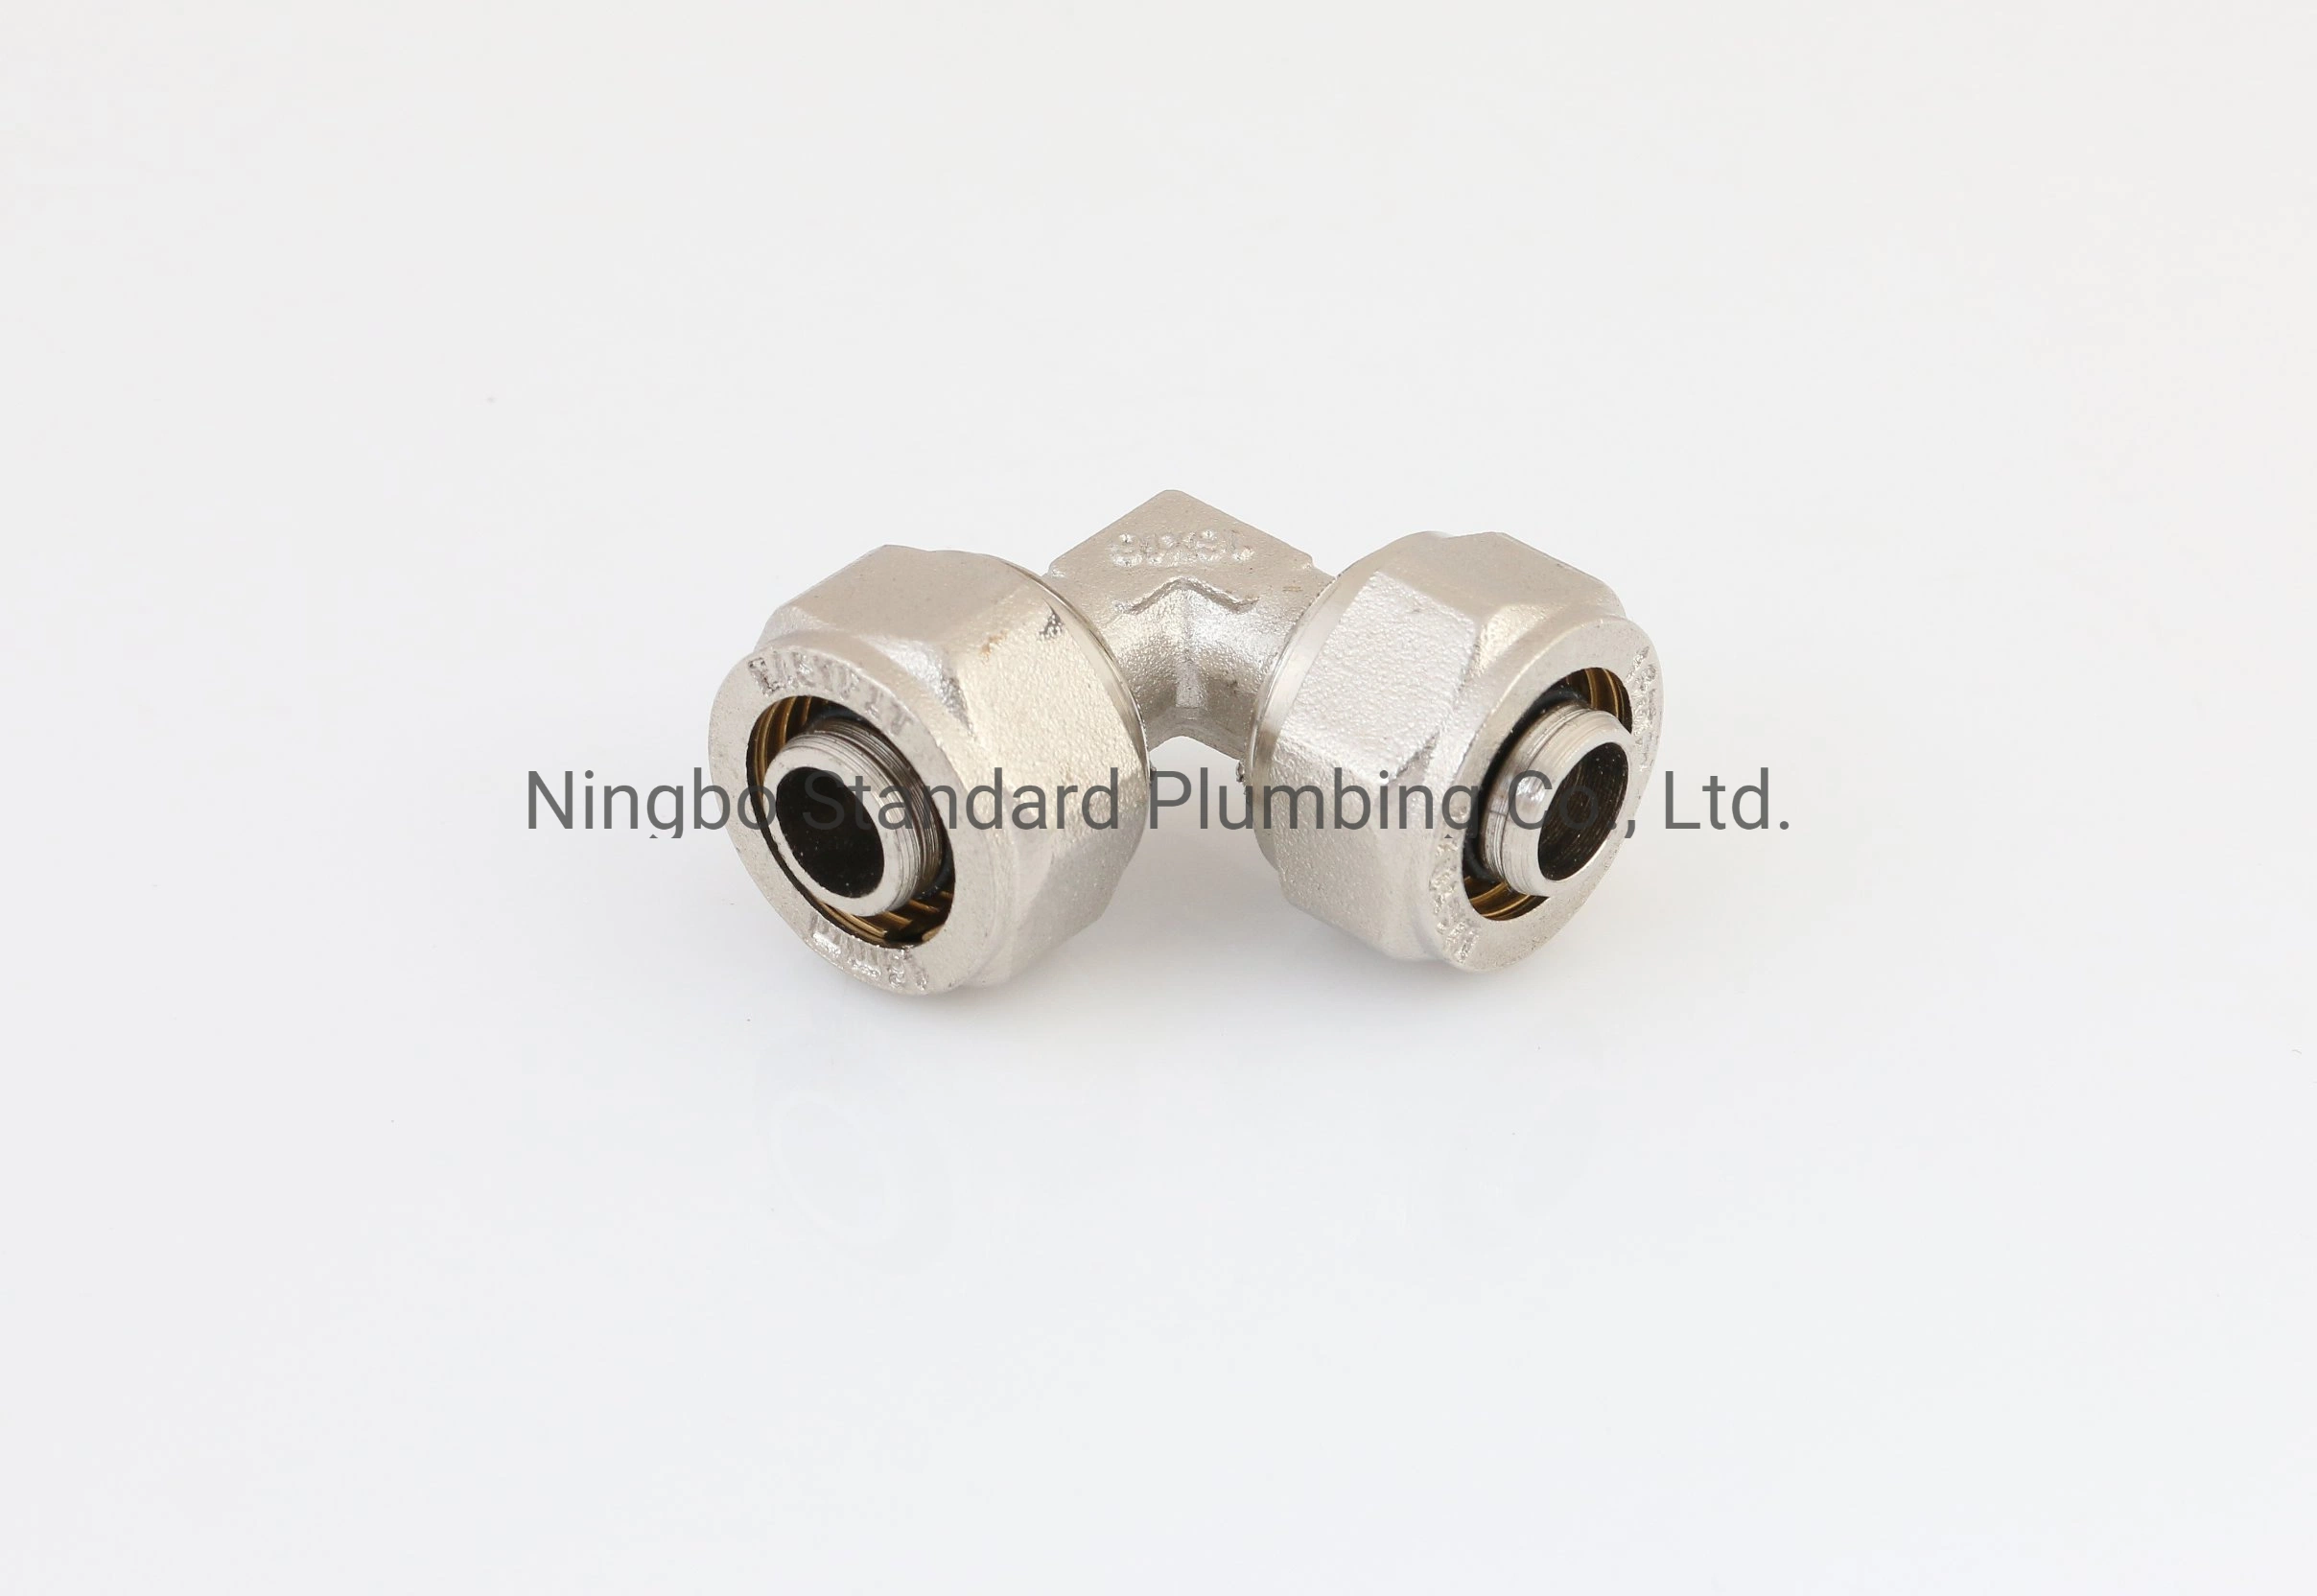 Brass Compression Elbow Union Fittings for Pex-Al-Pex Pipes